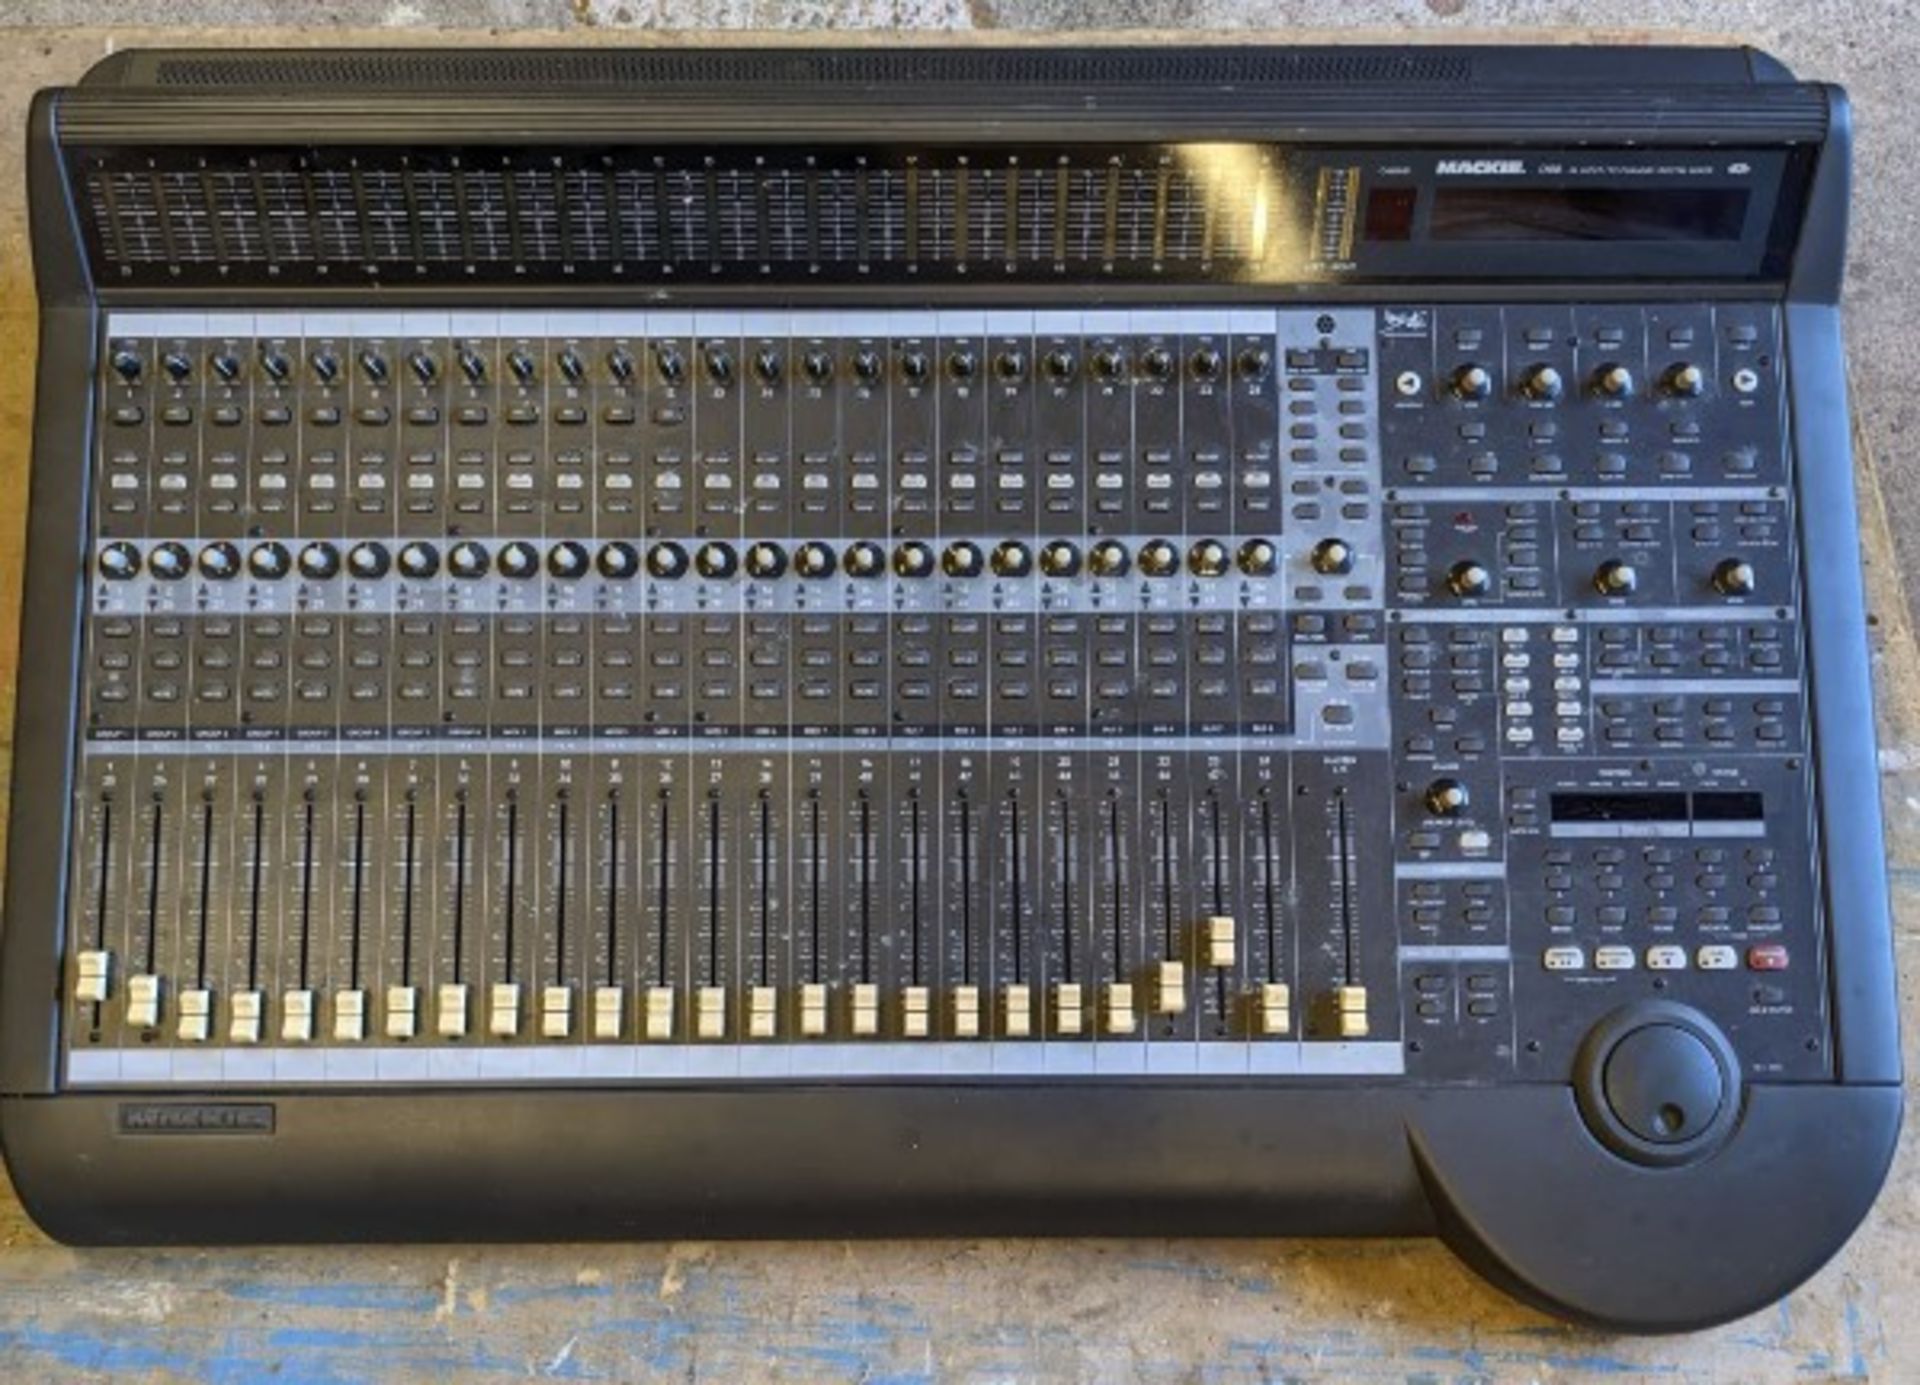 MACKIE DIGITAL 8 BUS MIXER. A lovely studio set-up here with mixing desk and dedicated rack mount